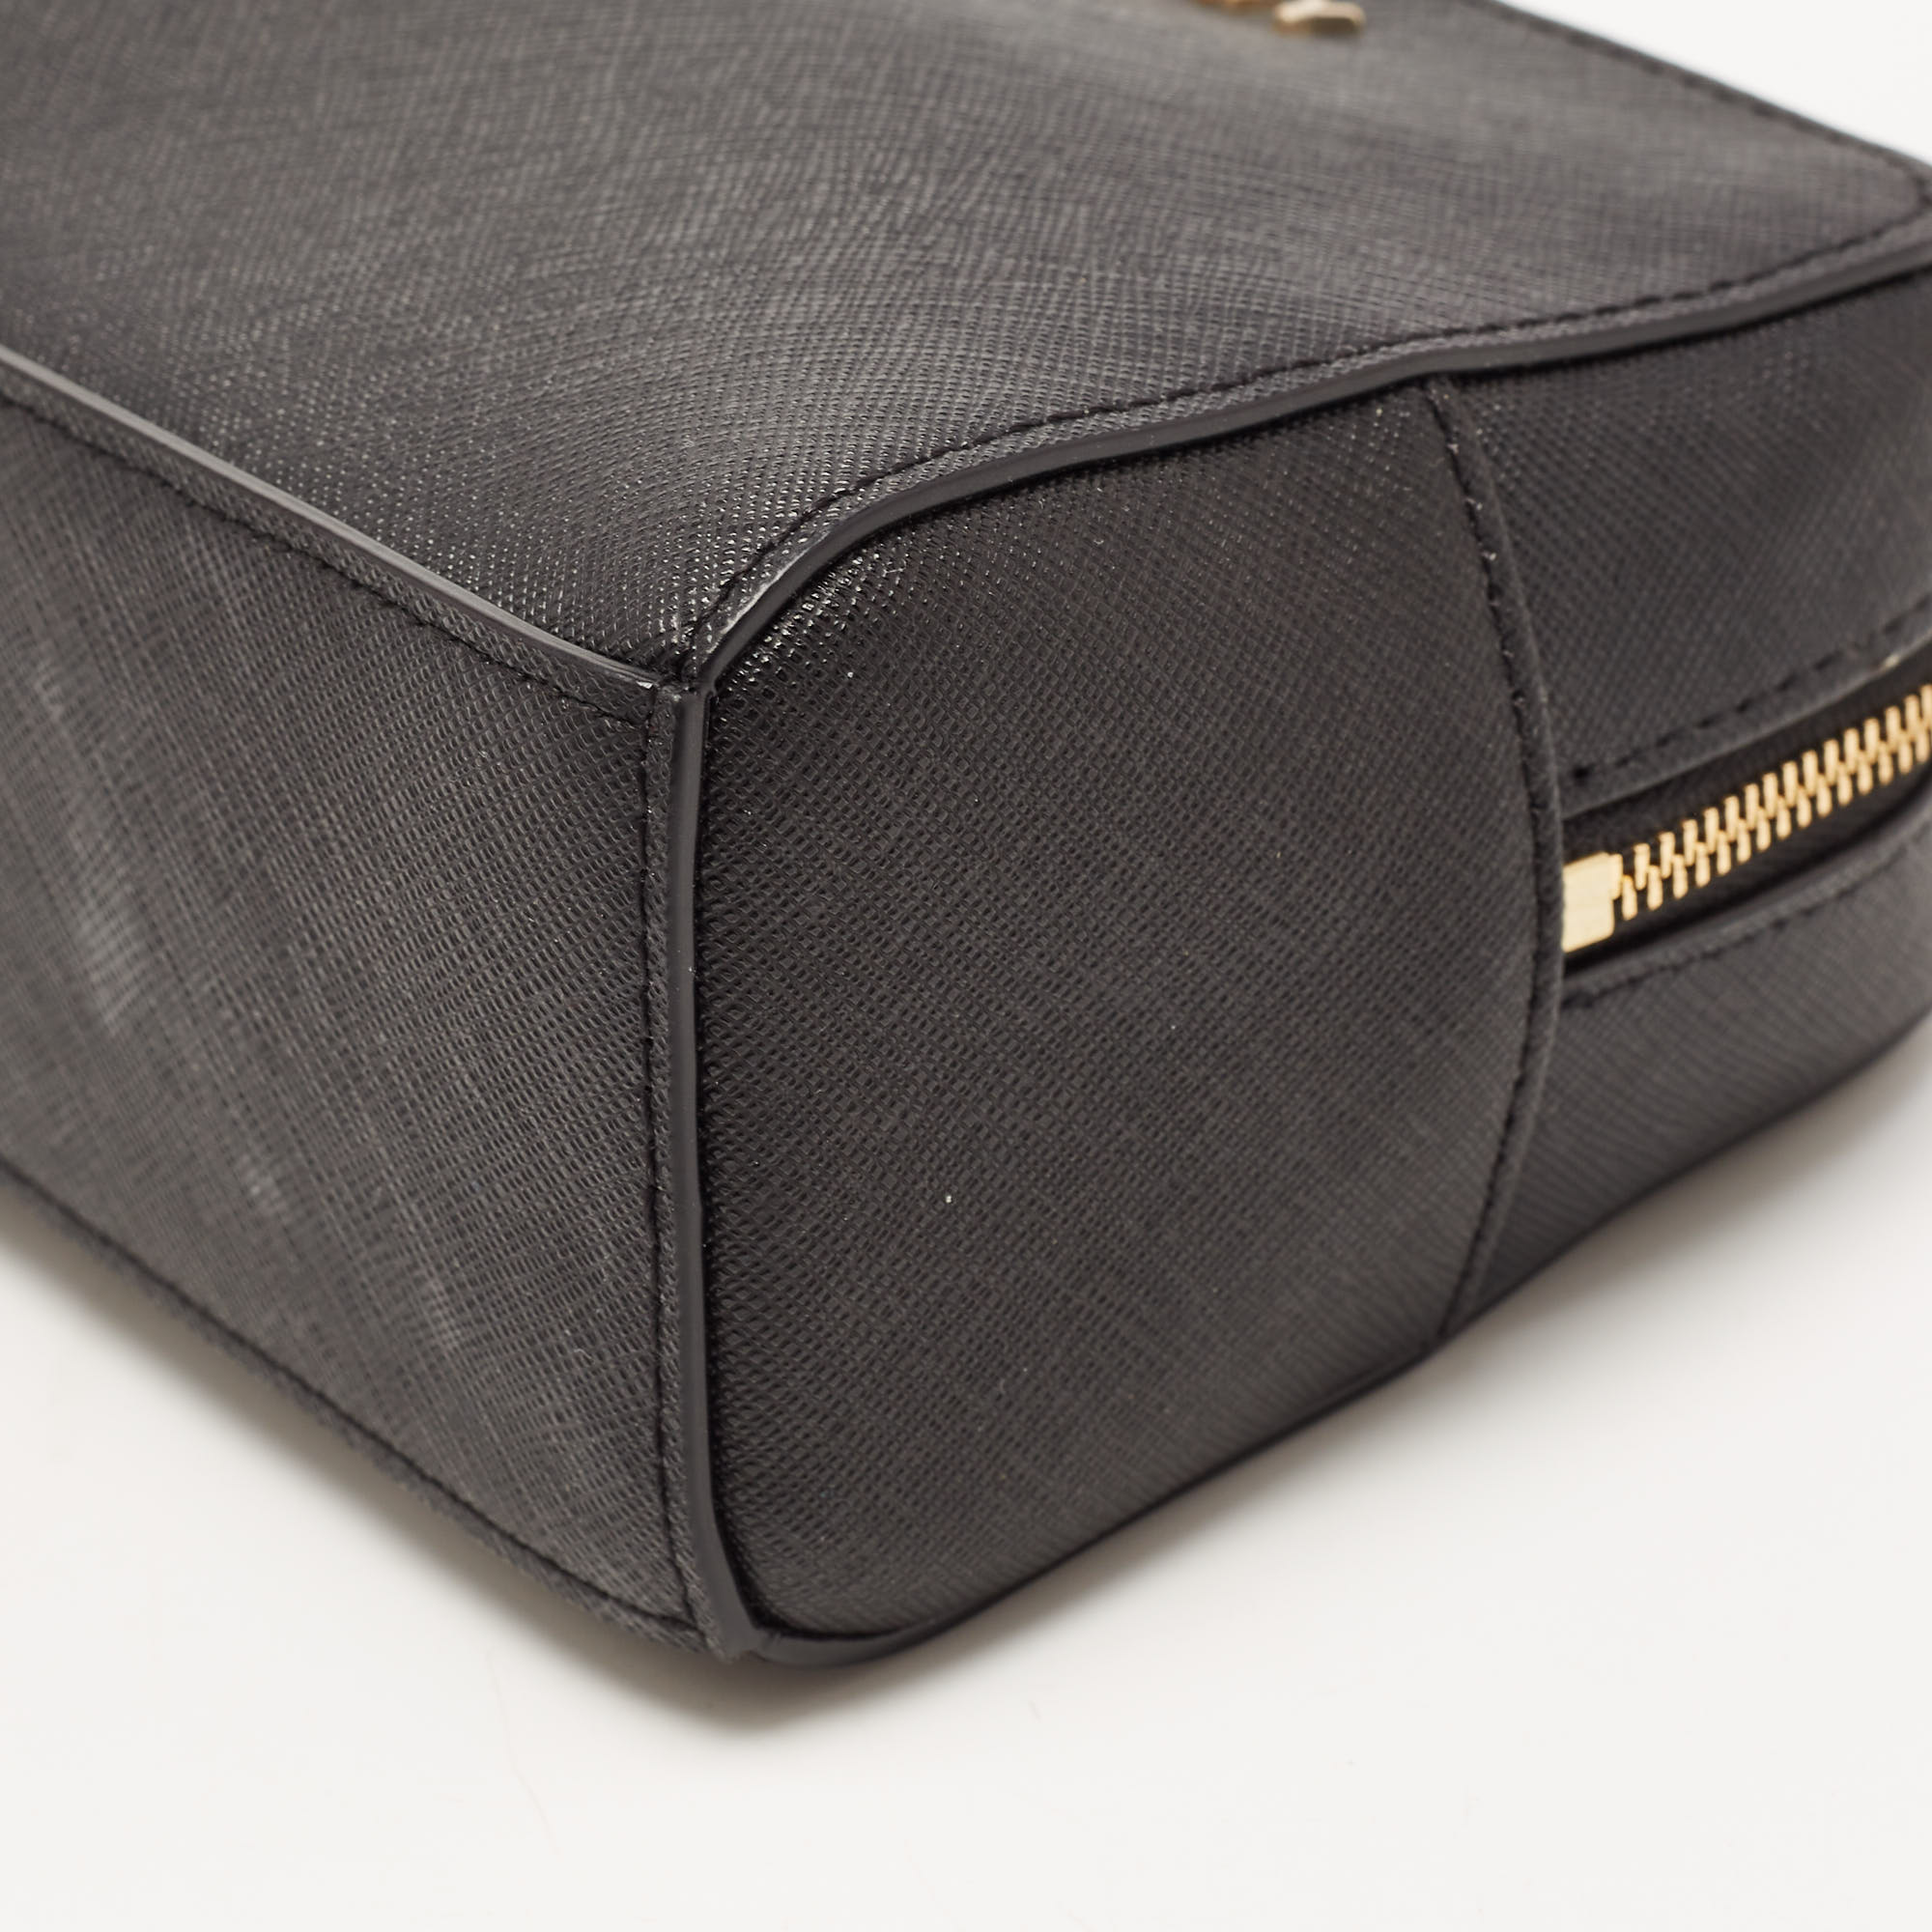 DKNY Black Saffiano Leather Cosmetic Pouch